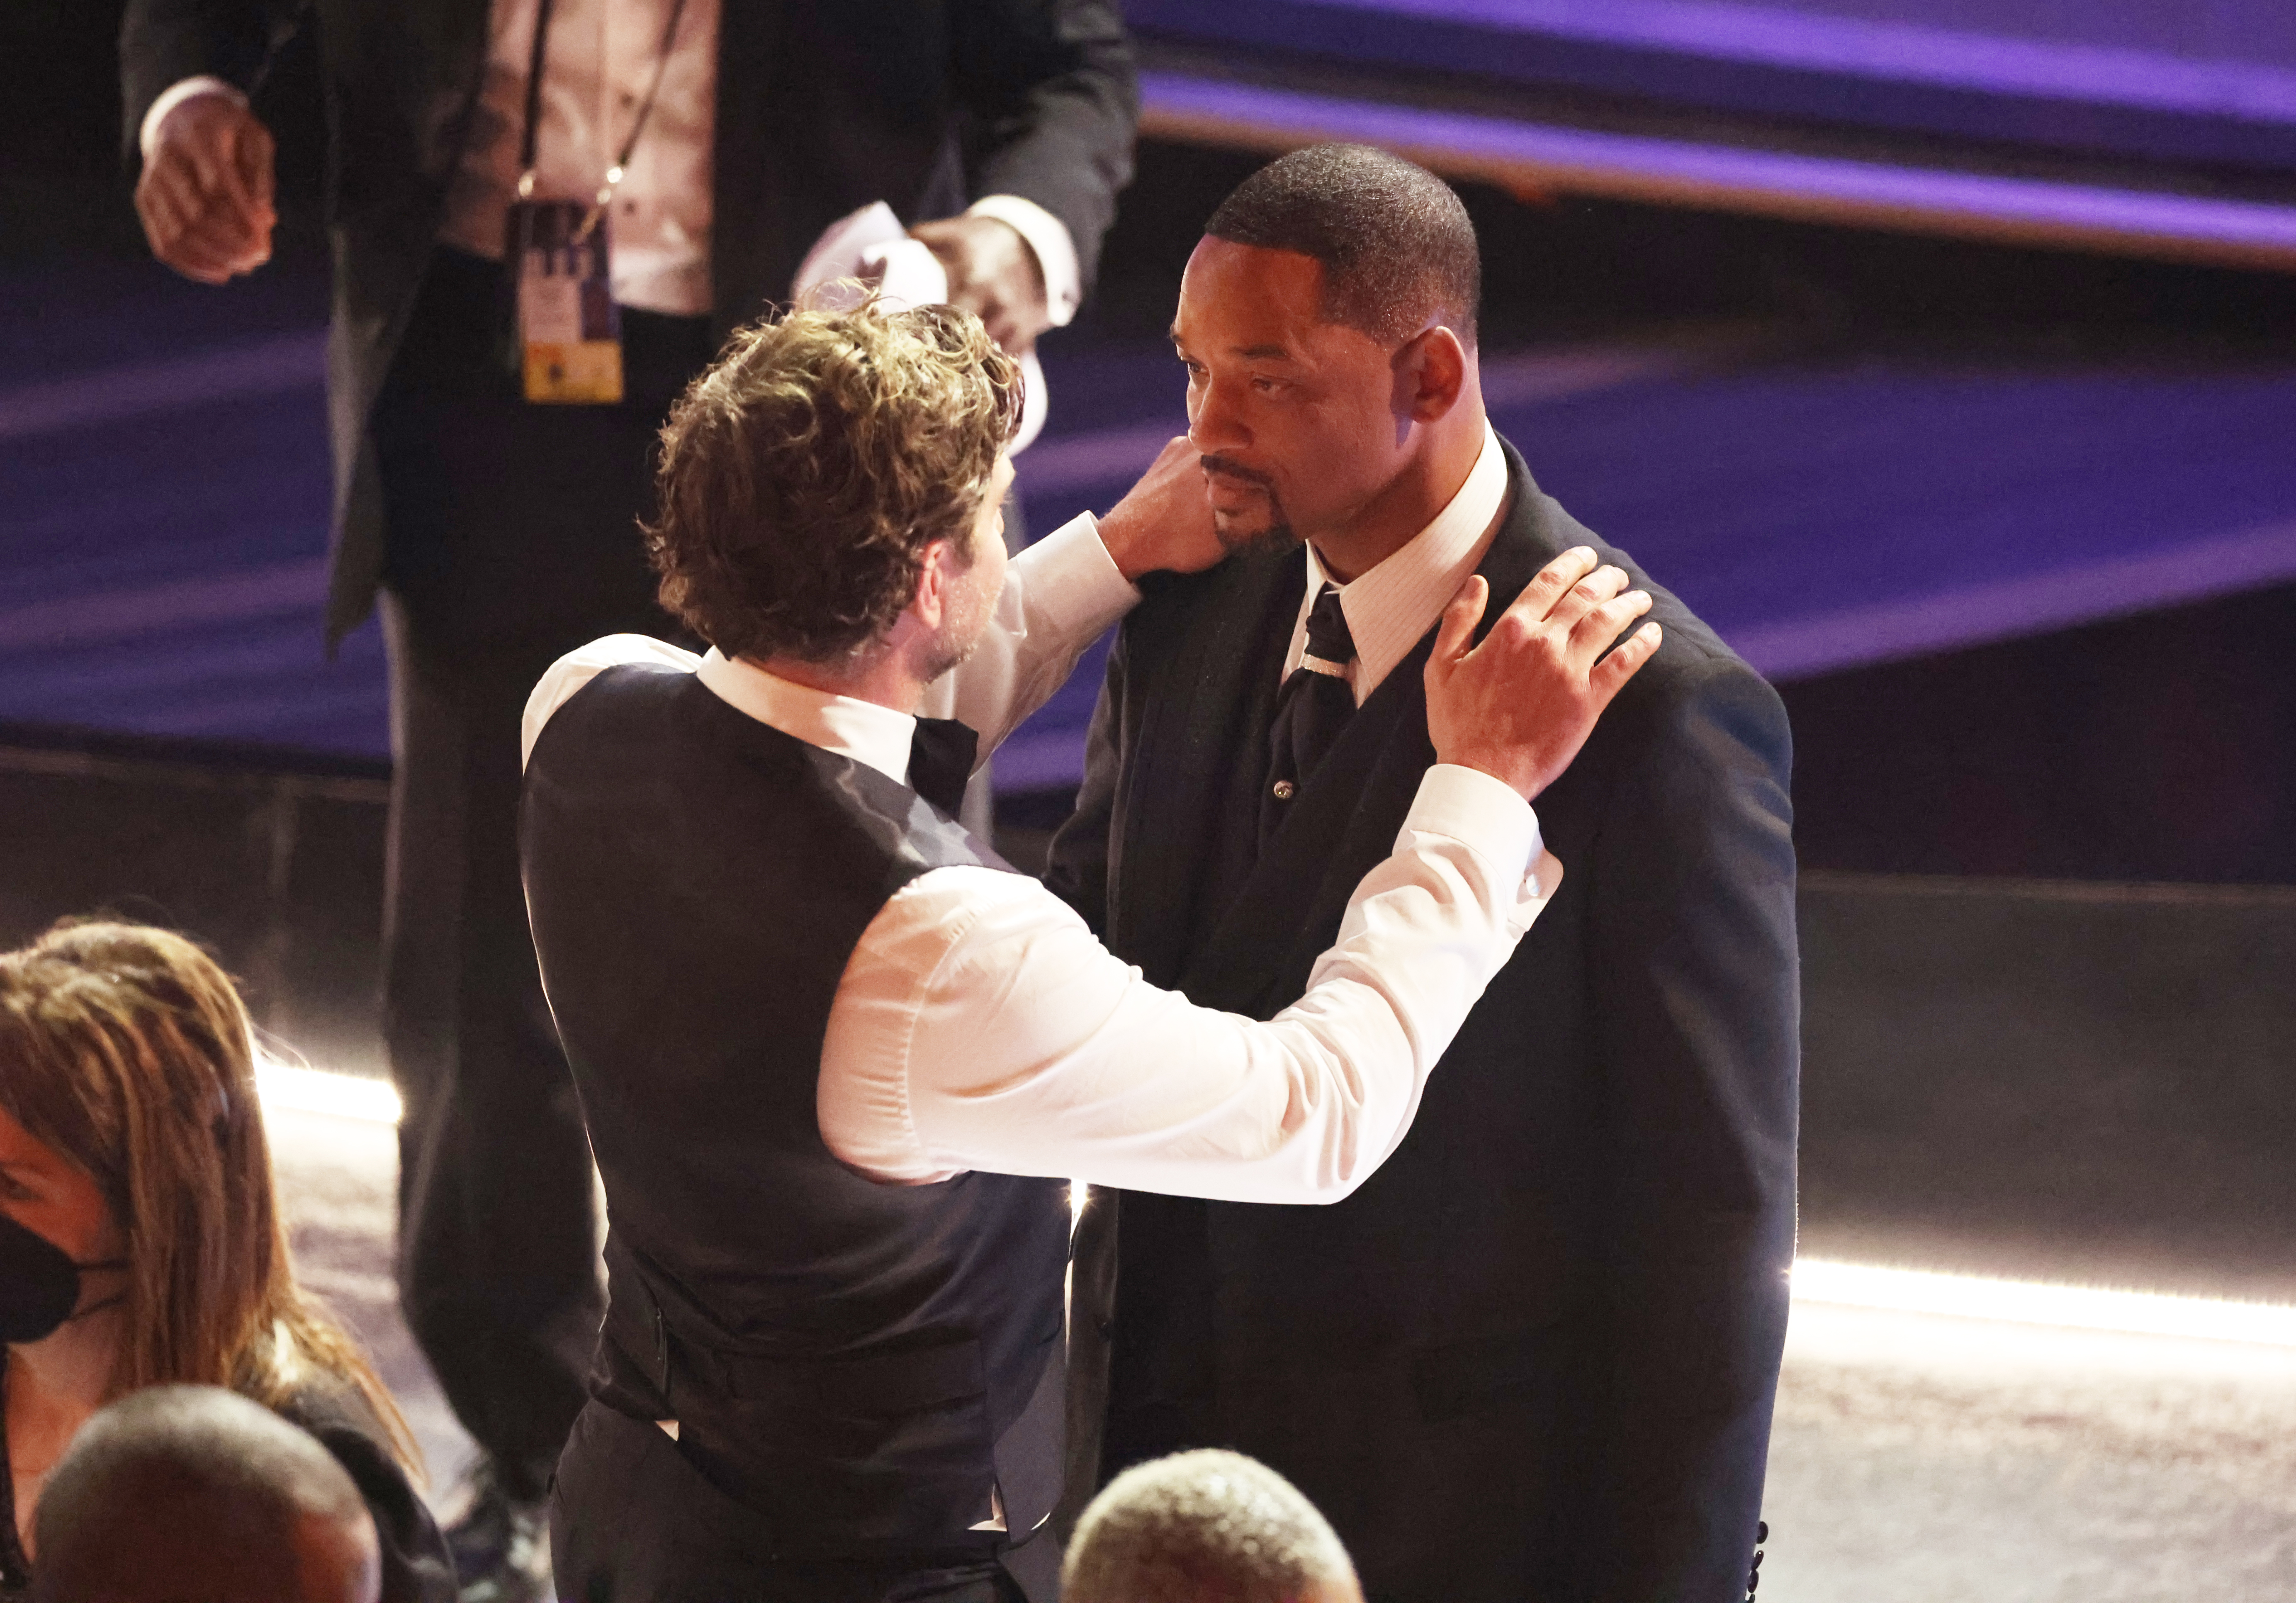 Bradley Cooper comforts Will Smith during the 94th Academy Awards at the Dolby Theatre at Ovation Hollywood on Sunday, March 27, 2022. | Source: Getty Images